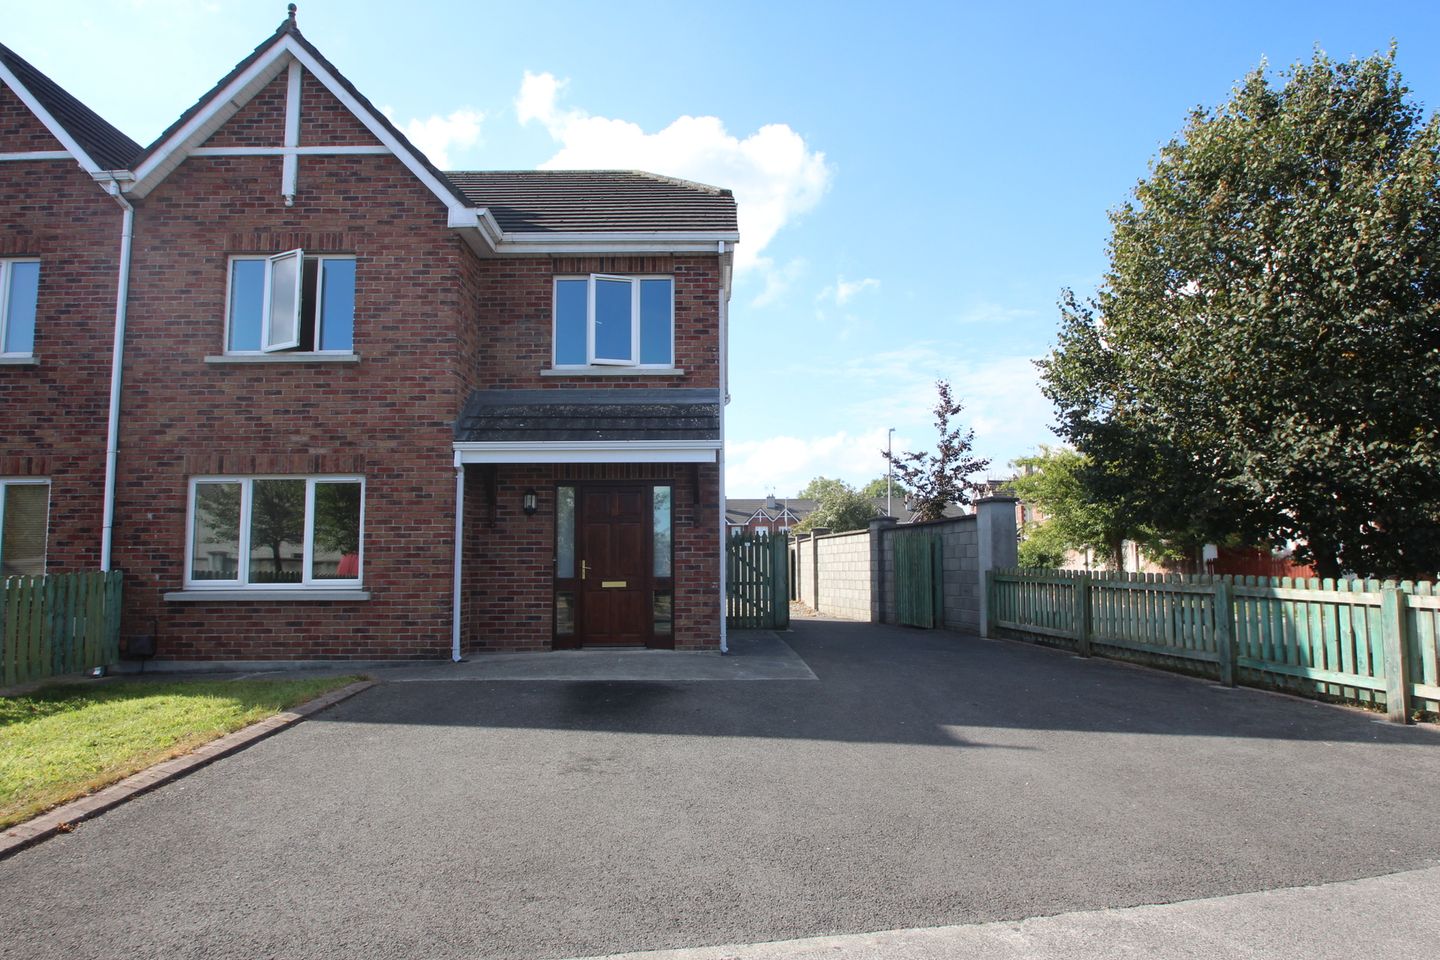 Chancery Park Road, Tullamore, Co. Offaly